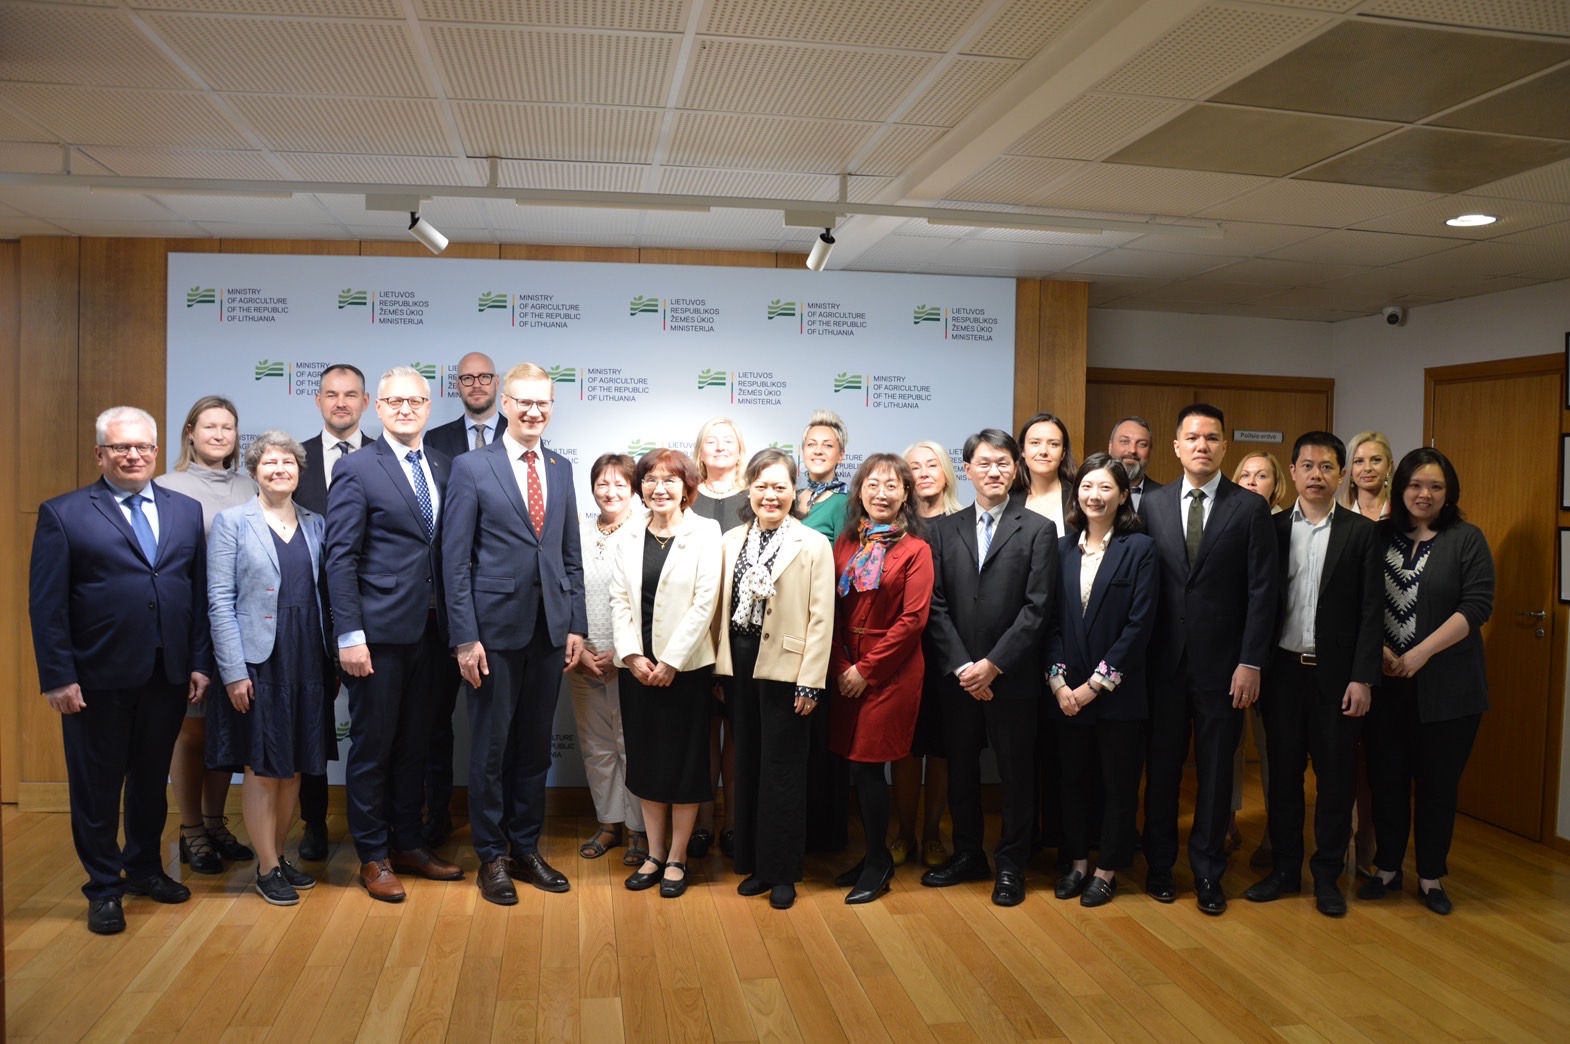 Following the “2nd Taiwan-Lithuania Agricultural Working Group Meeting,” the deputy ministers of agriculture, representatives of the two ministries of agriculture, and members of issue-focused units posed for this group photo.